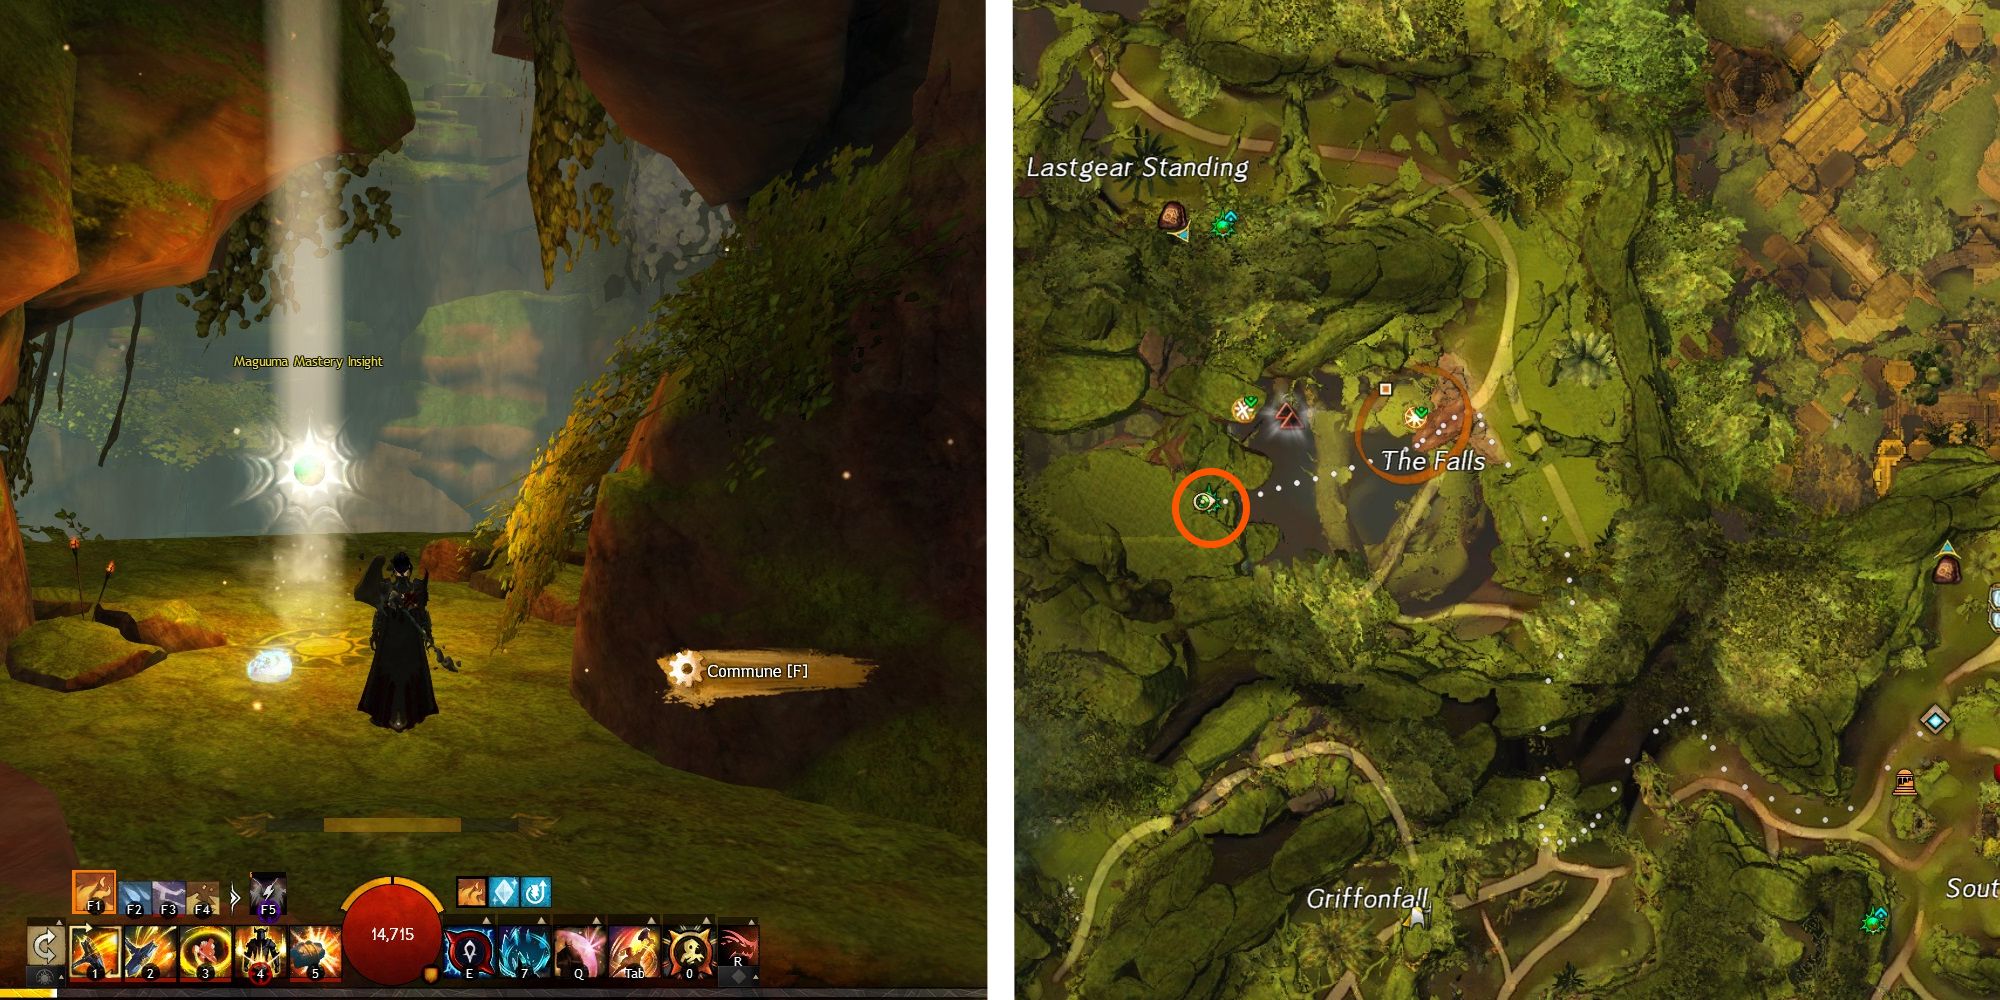 image of player at The Falls Insight next to image of location on map